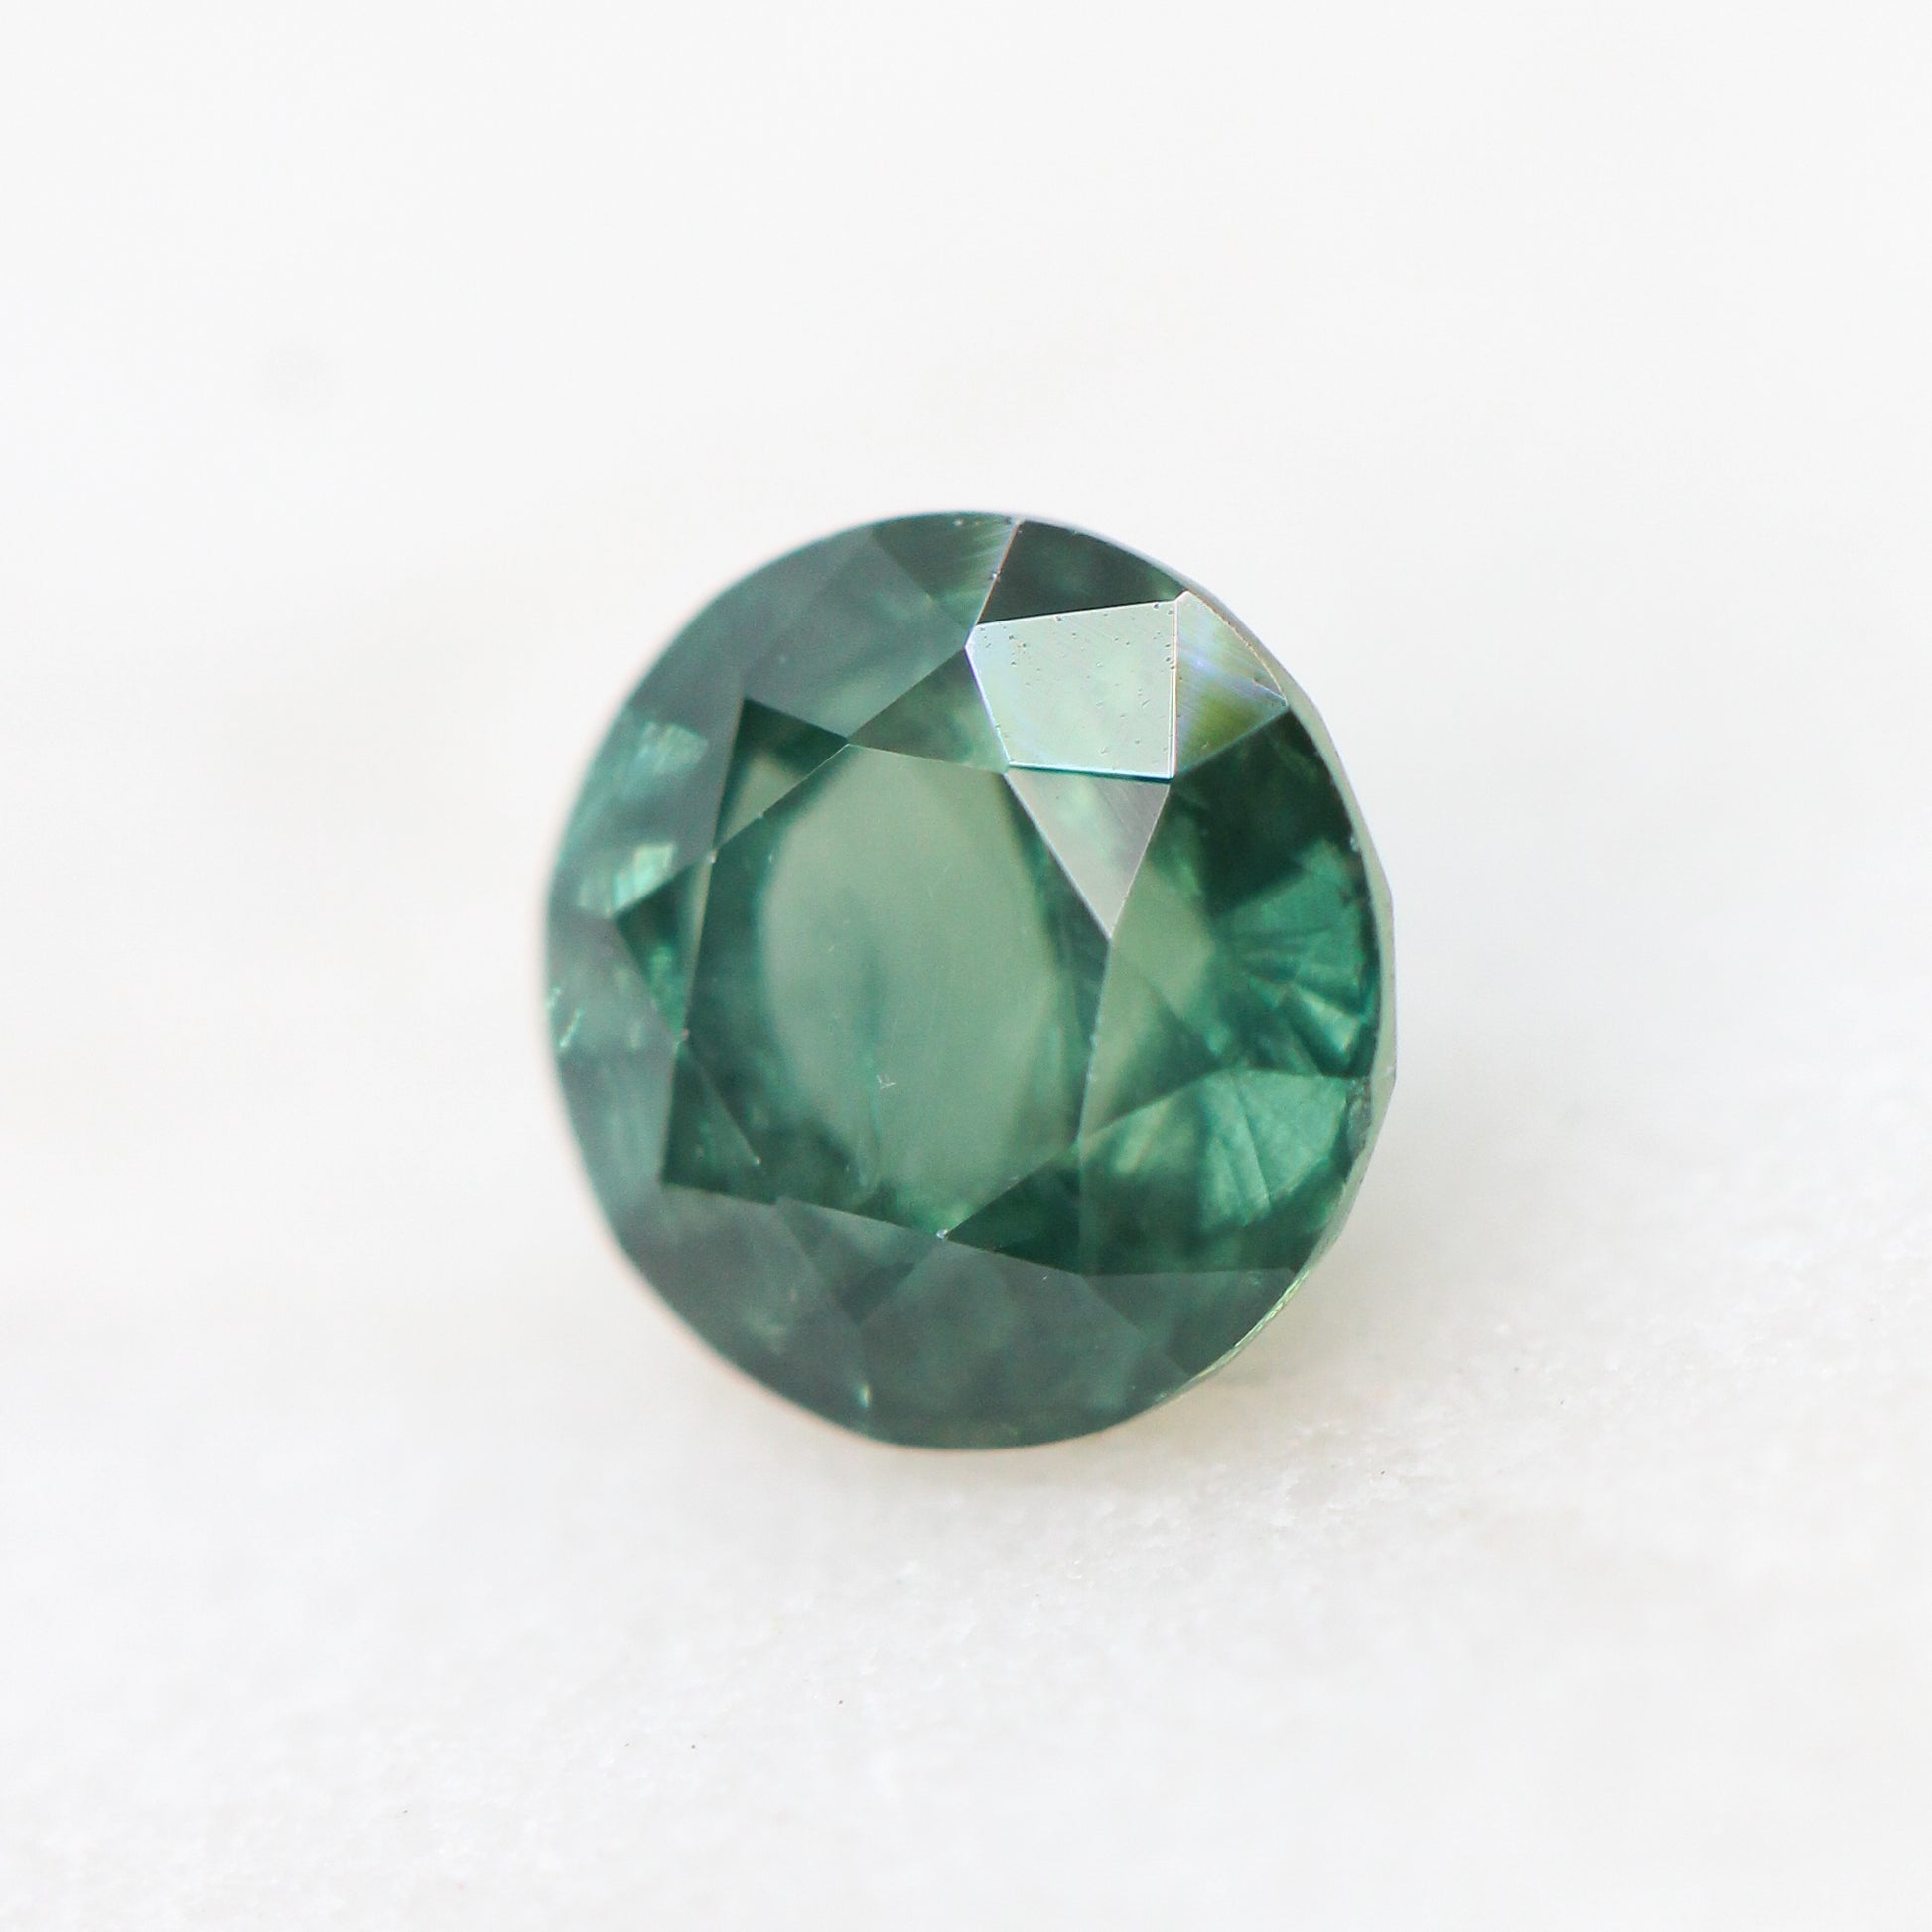 0.73 Carat Certified Round Green Sapphire for Custom Work - Inventory Code GRS073 - Midwinter Co. Alternative Bridal Rings and Modern Fine Jewelry